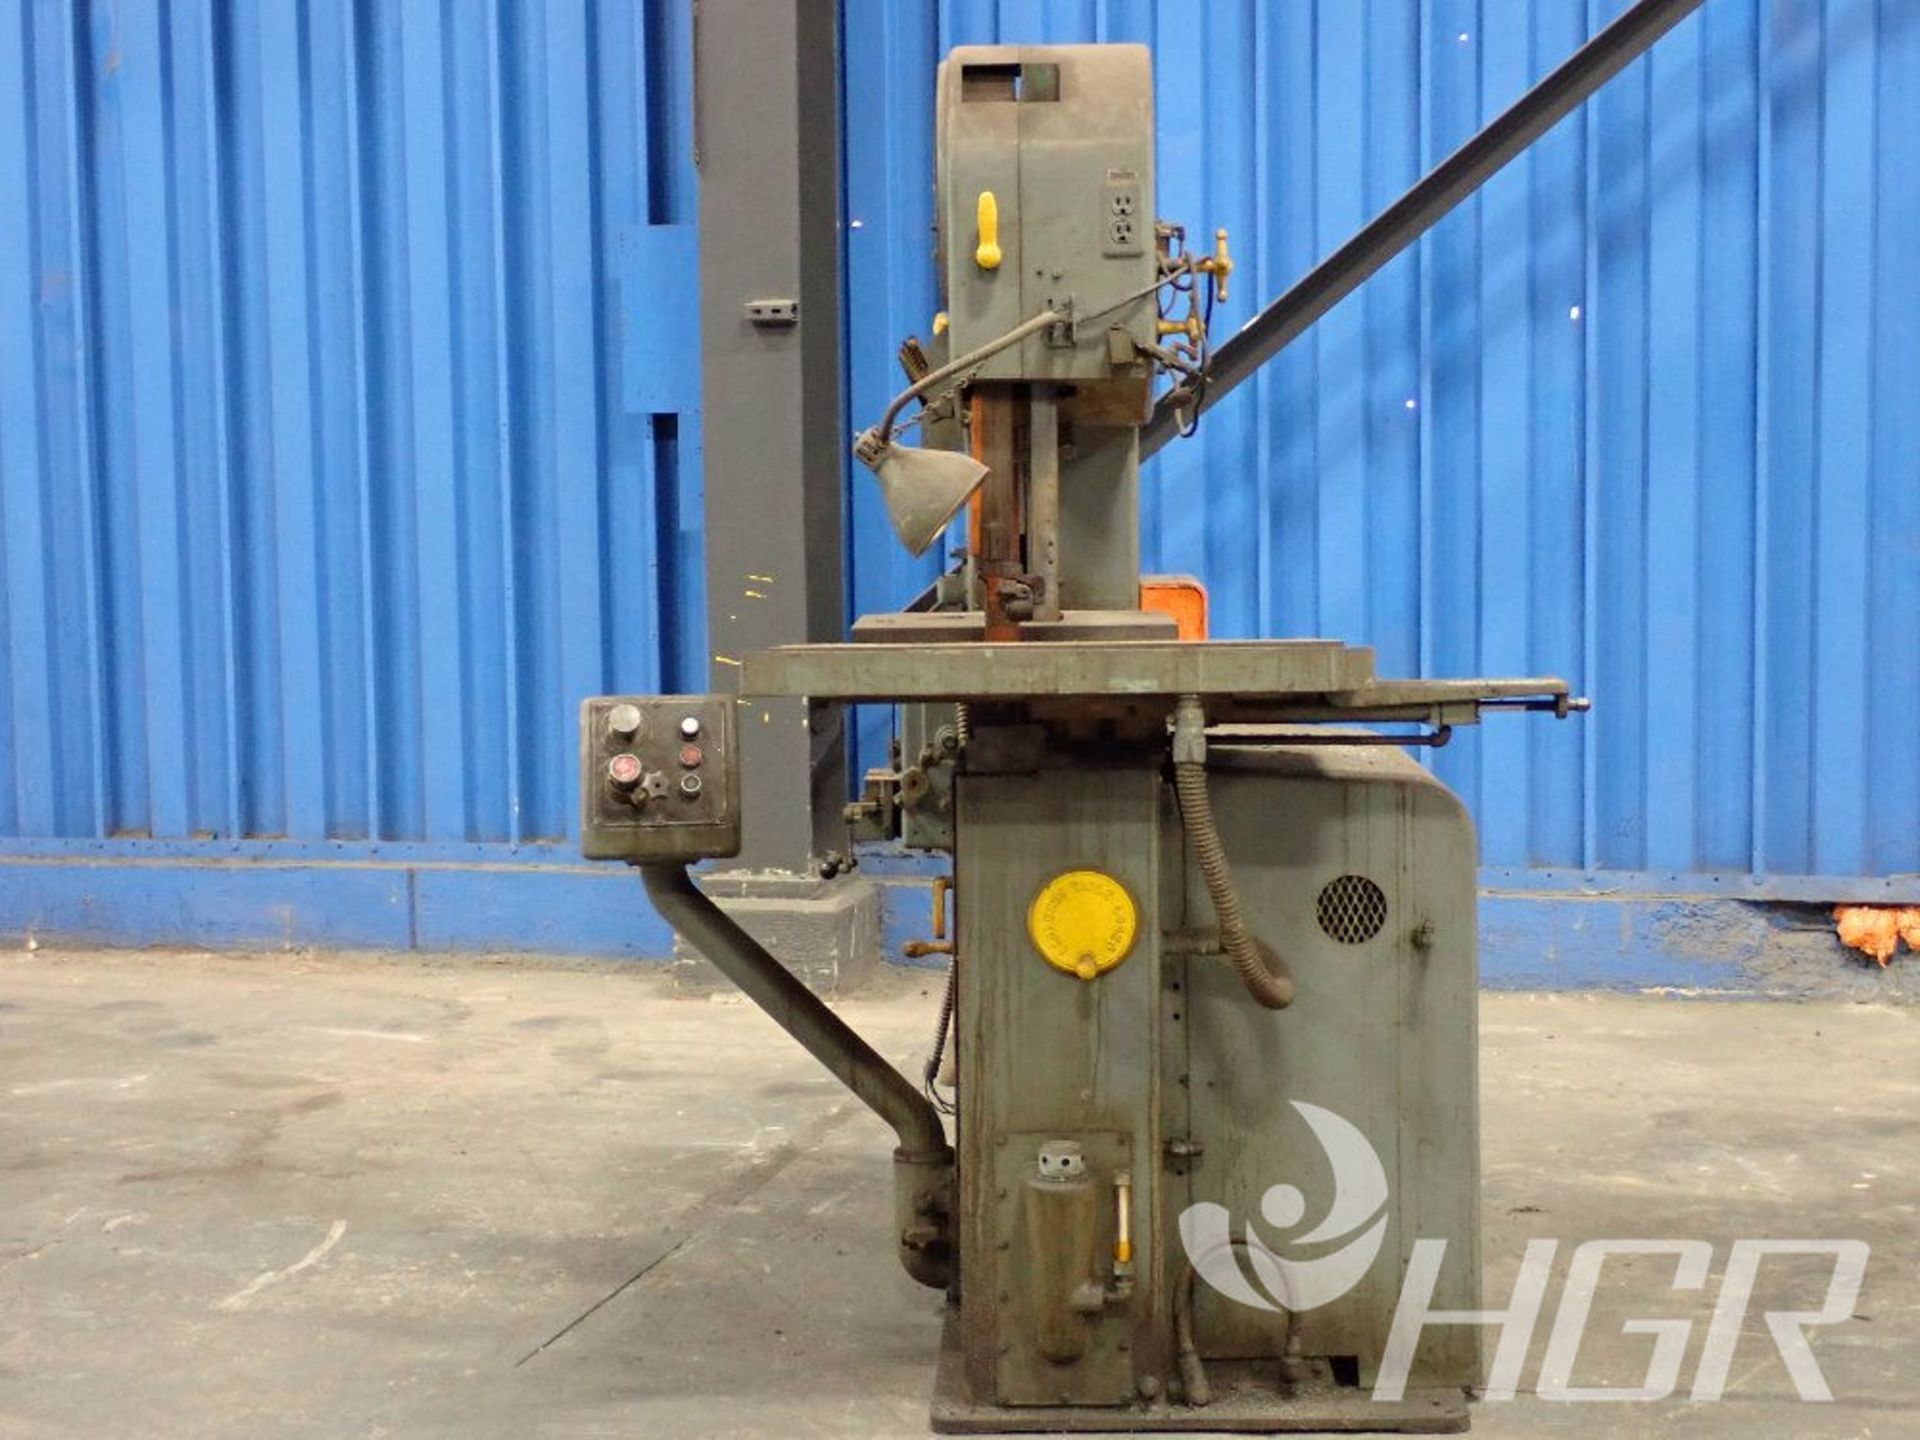 DOALL BANDSAW, Model 3612-3. , Date: n/a; s/n 153-691067, Approx. Capacity: 16", Power: n/a, - Image 2 of 29